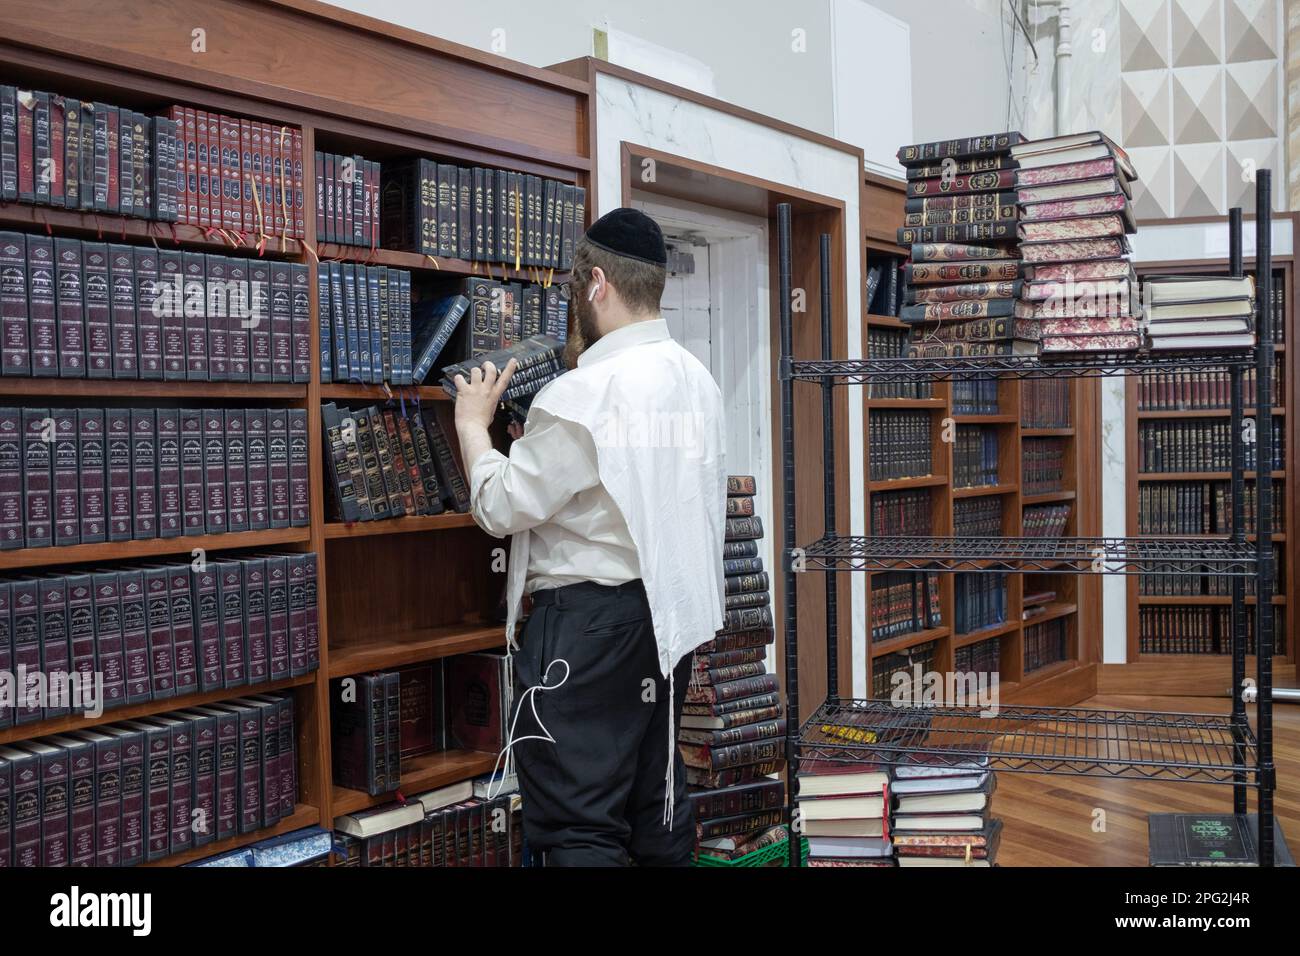 A sexton at a synagogue removes volumes of Exodus & adds volumes of Leviticus so worshippers could keep track during Torah readings. In New York City. Stock Photo